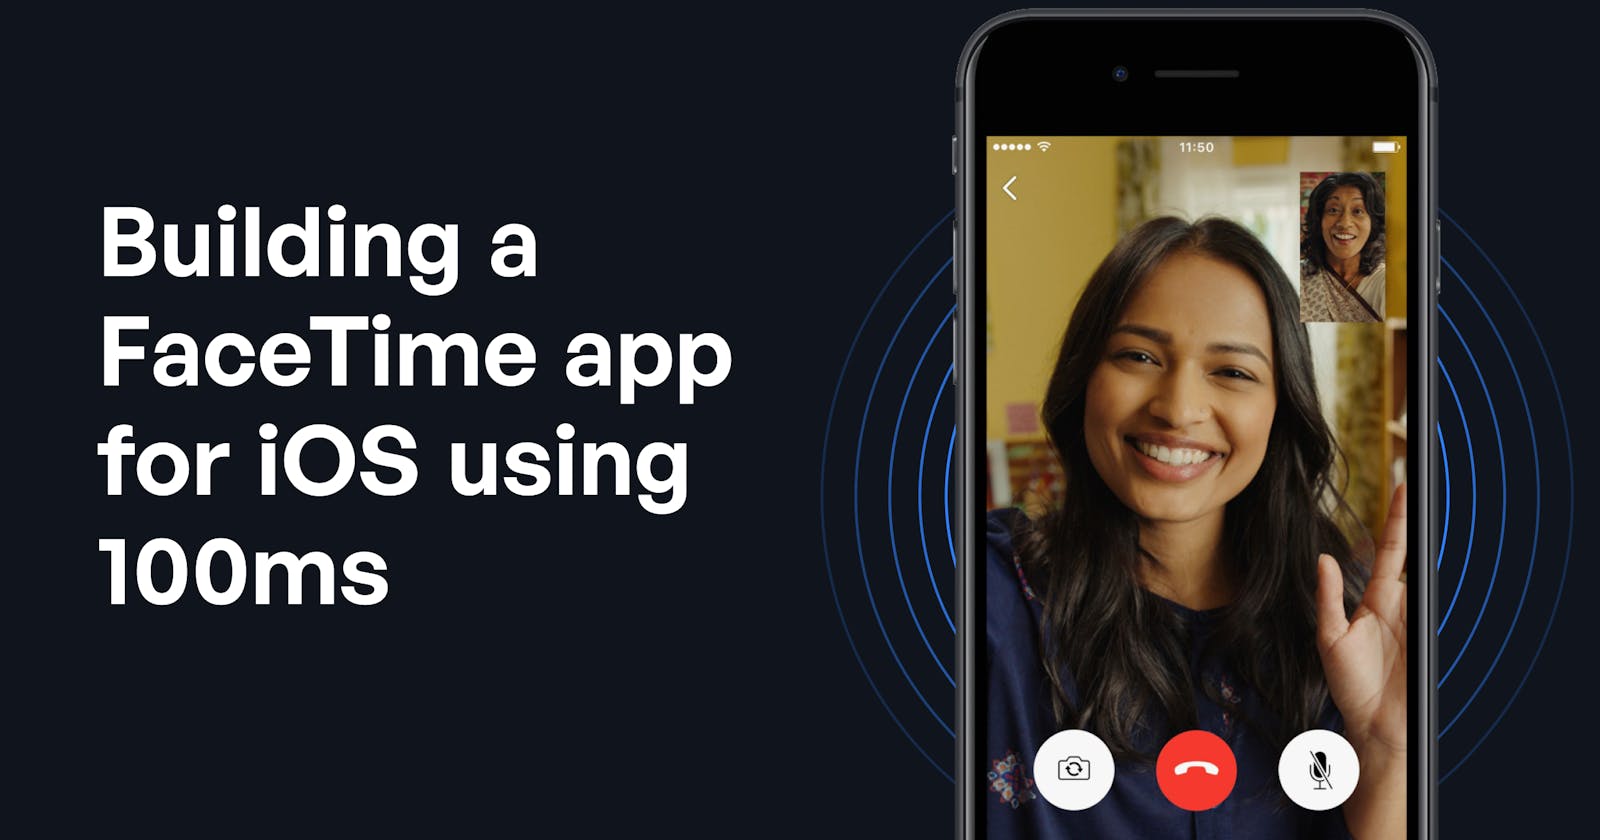 Building a FaceTime app for iOS using 100ms